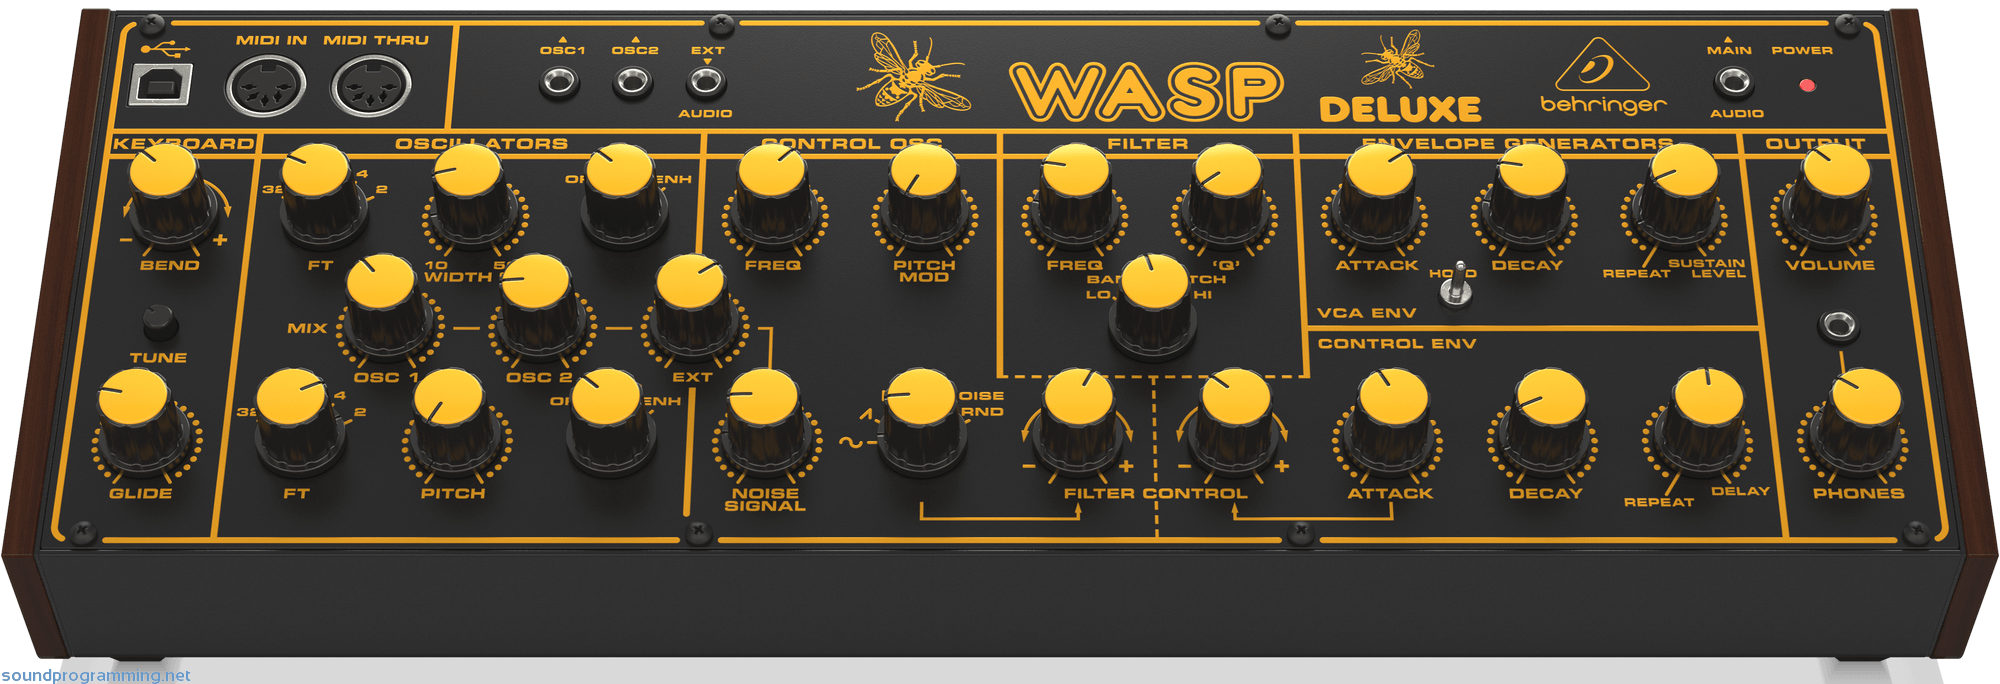 Behringer Wasp Deluxe Front View